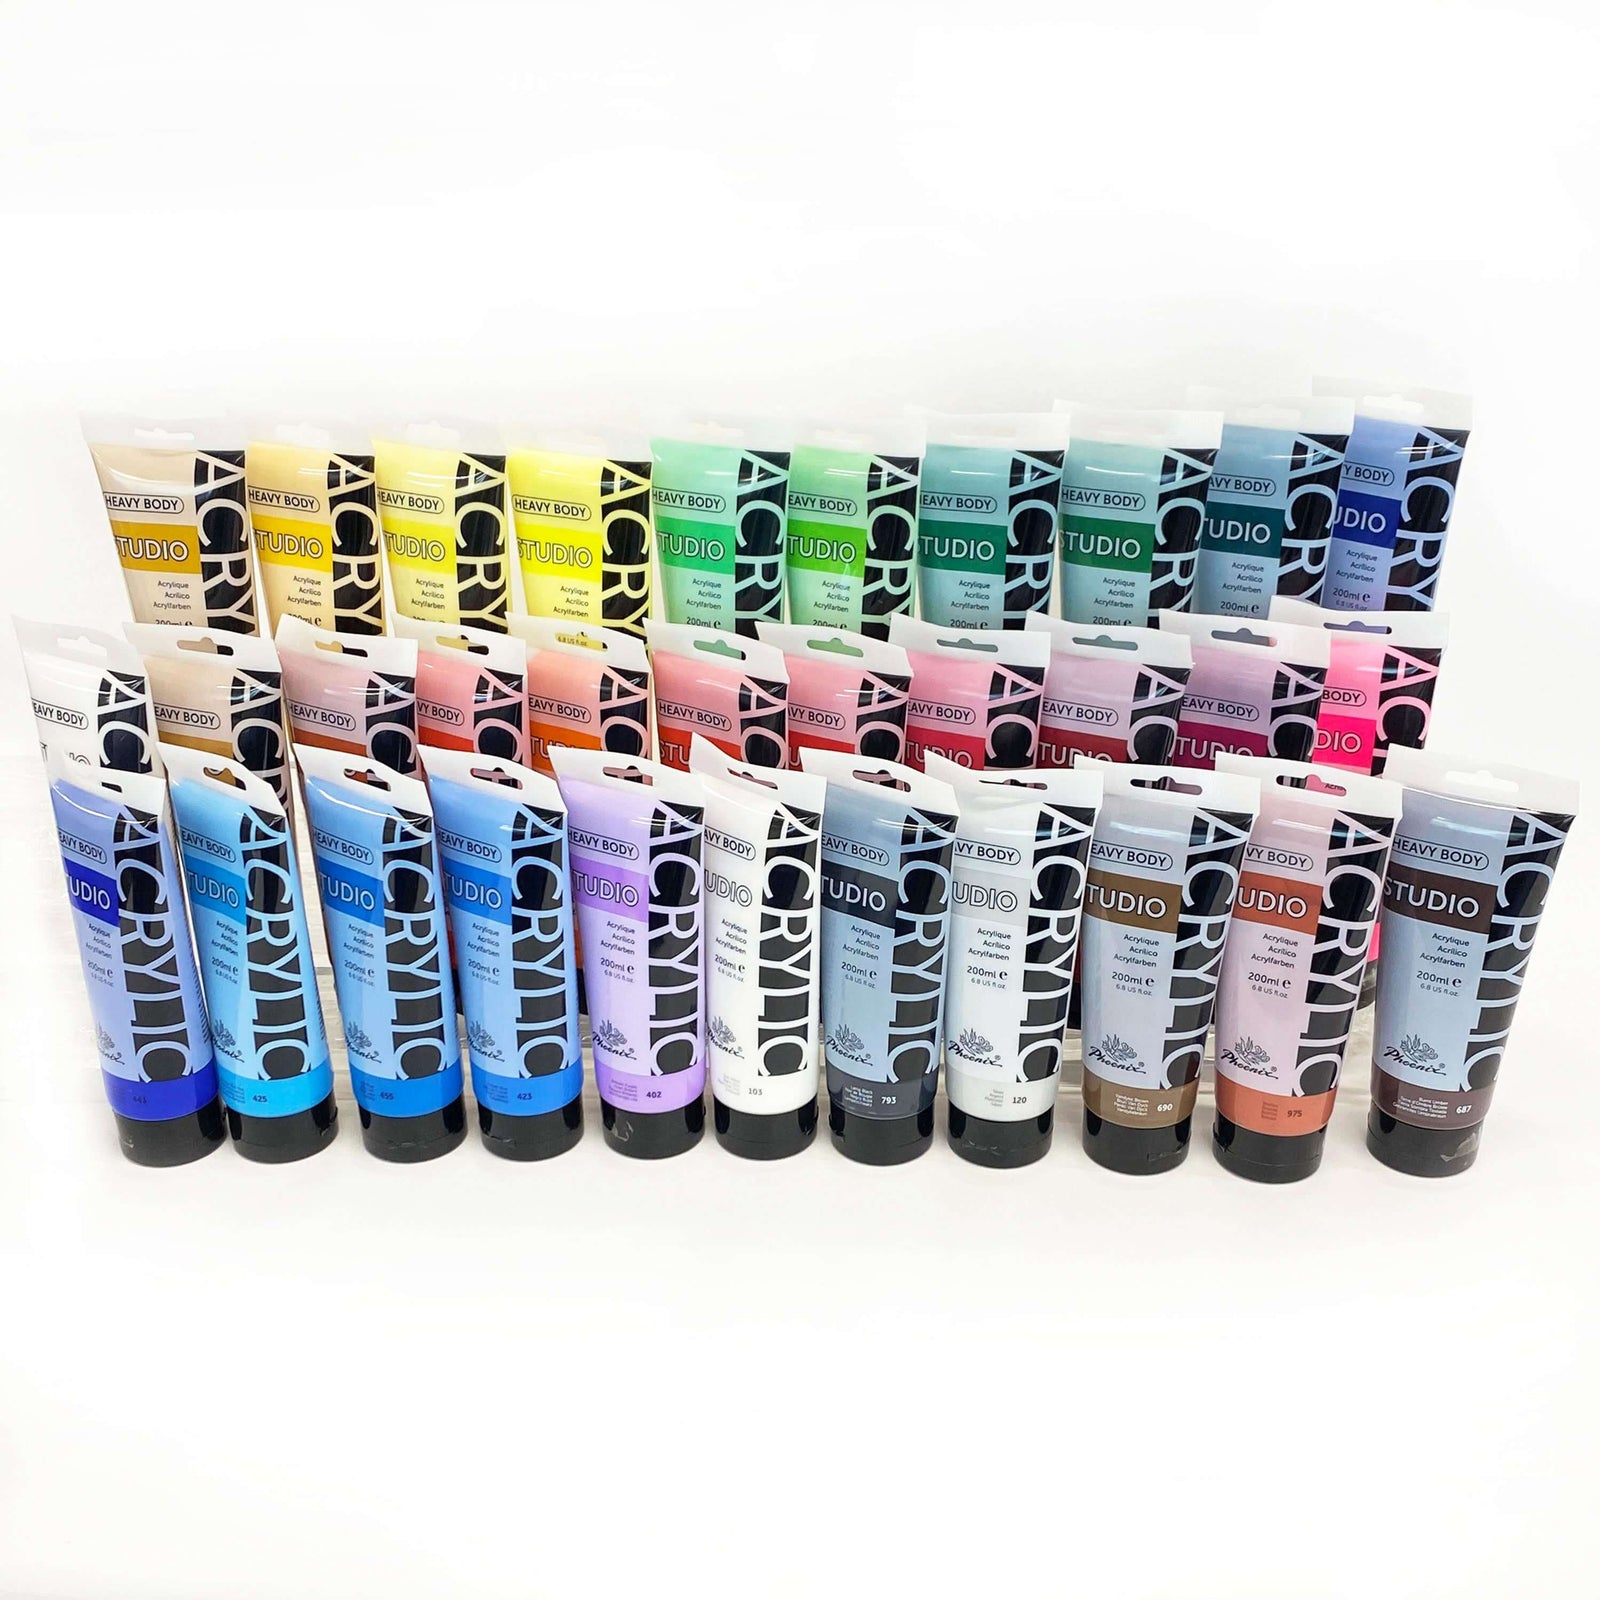 Soft Body Acrylic Paint Sets, Set of 12, Primary Colors